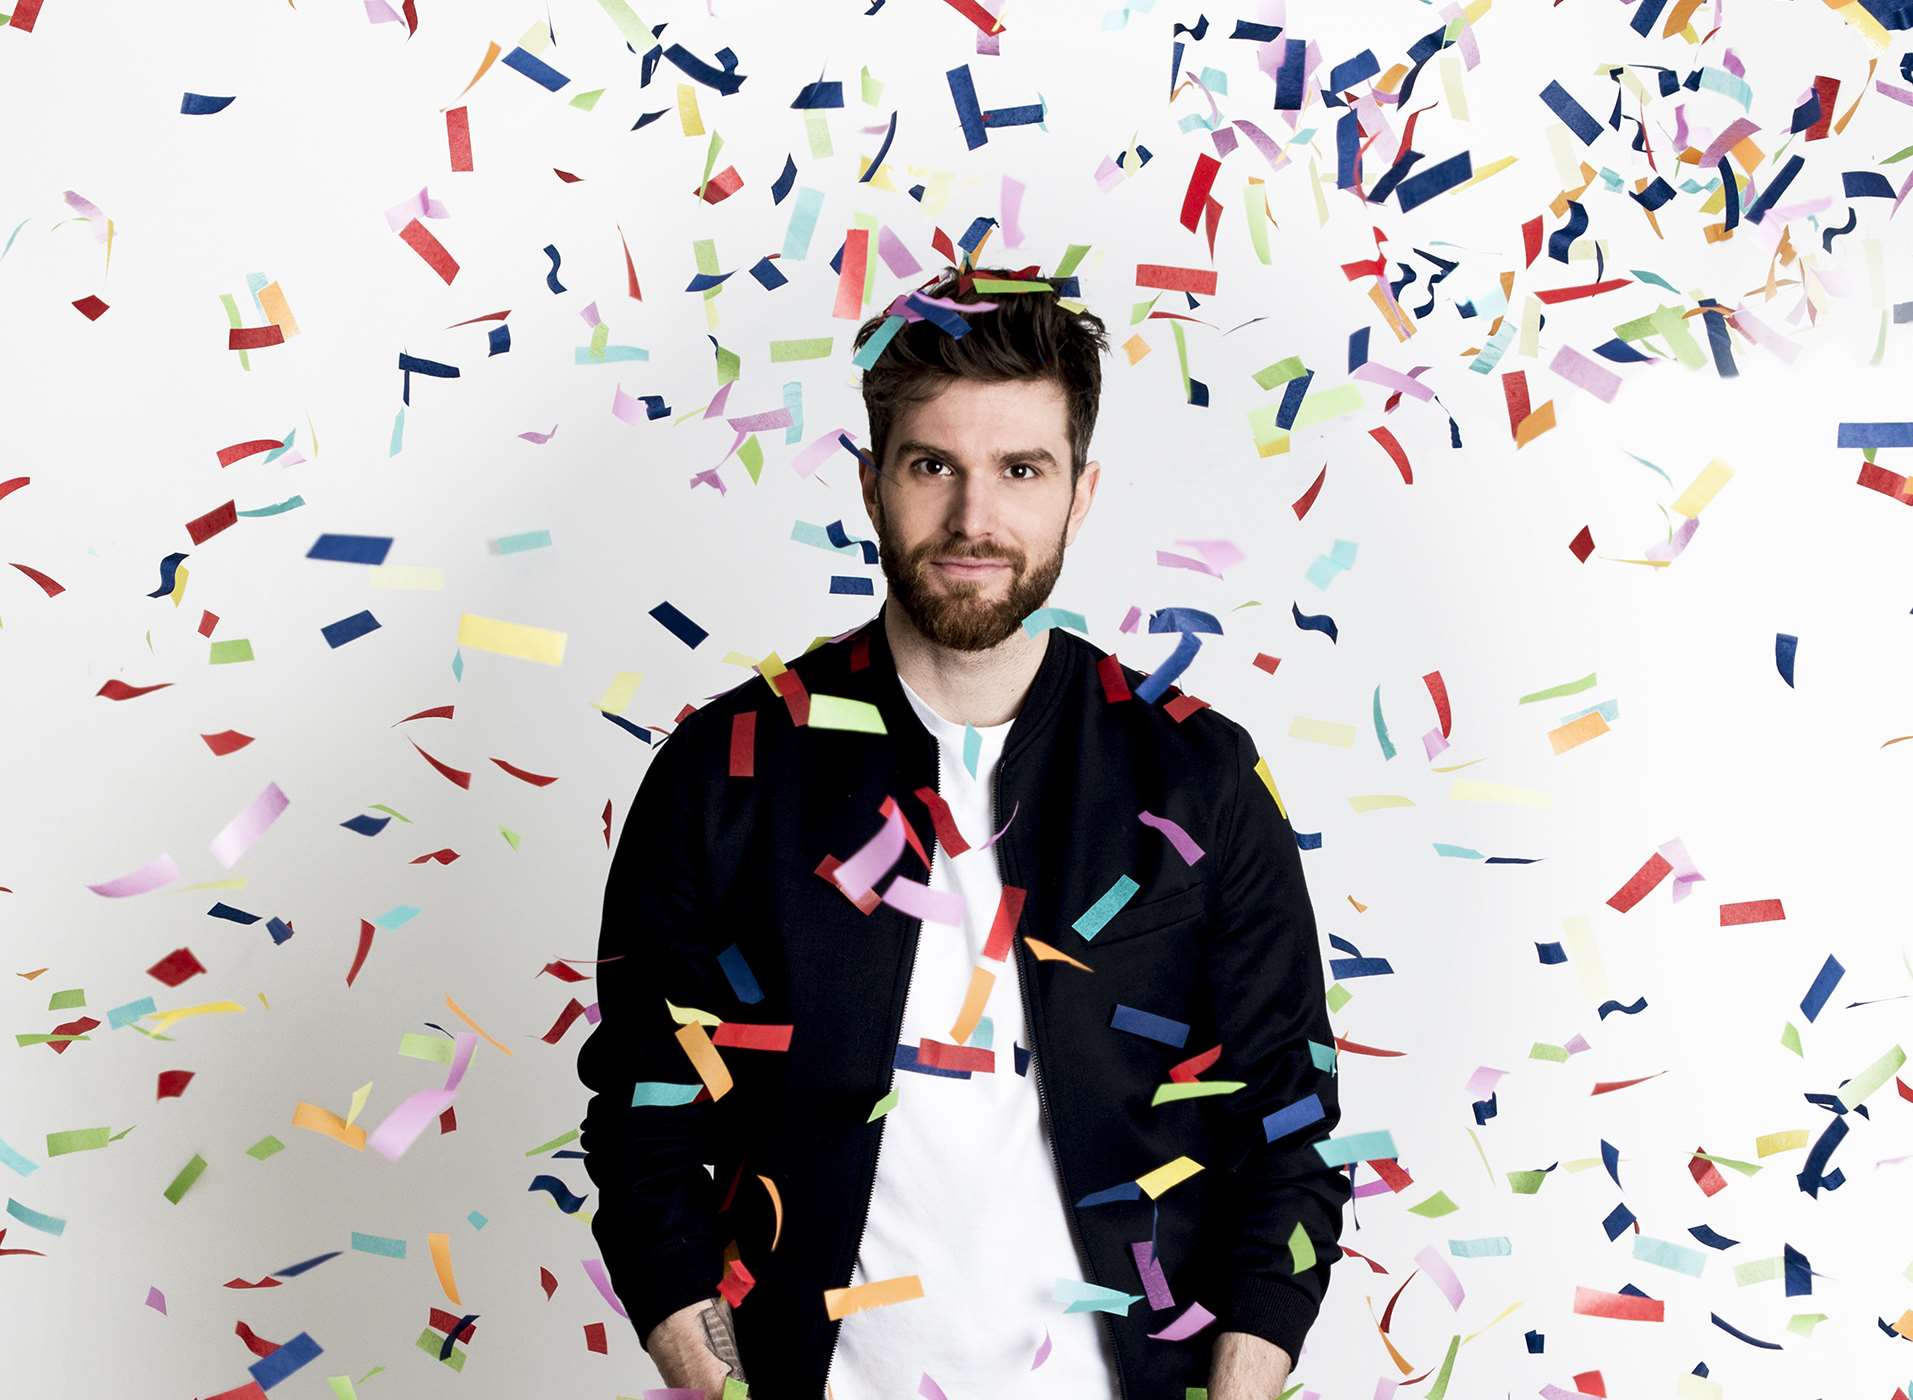 I'm a Celebrity! star Joel Dommett will be coming to Margate